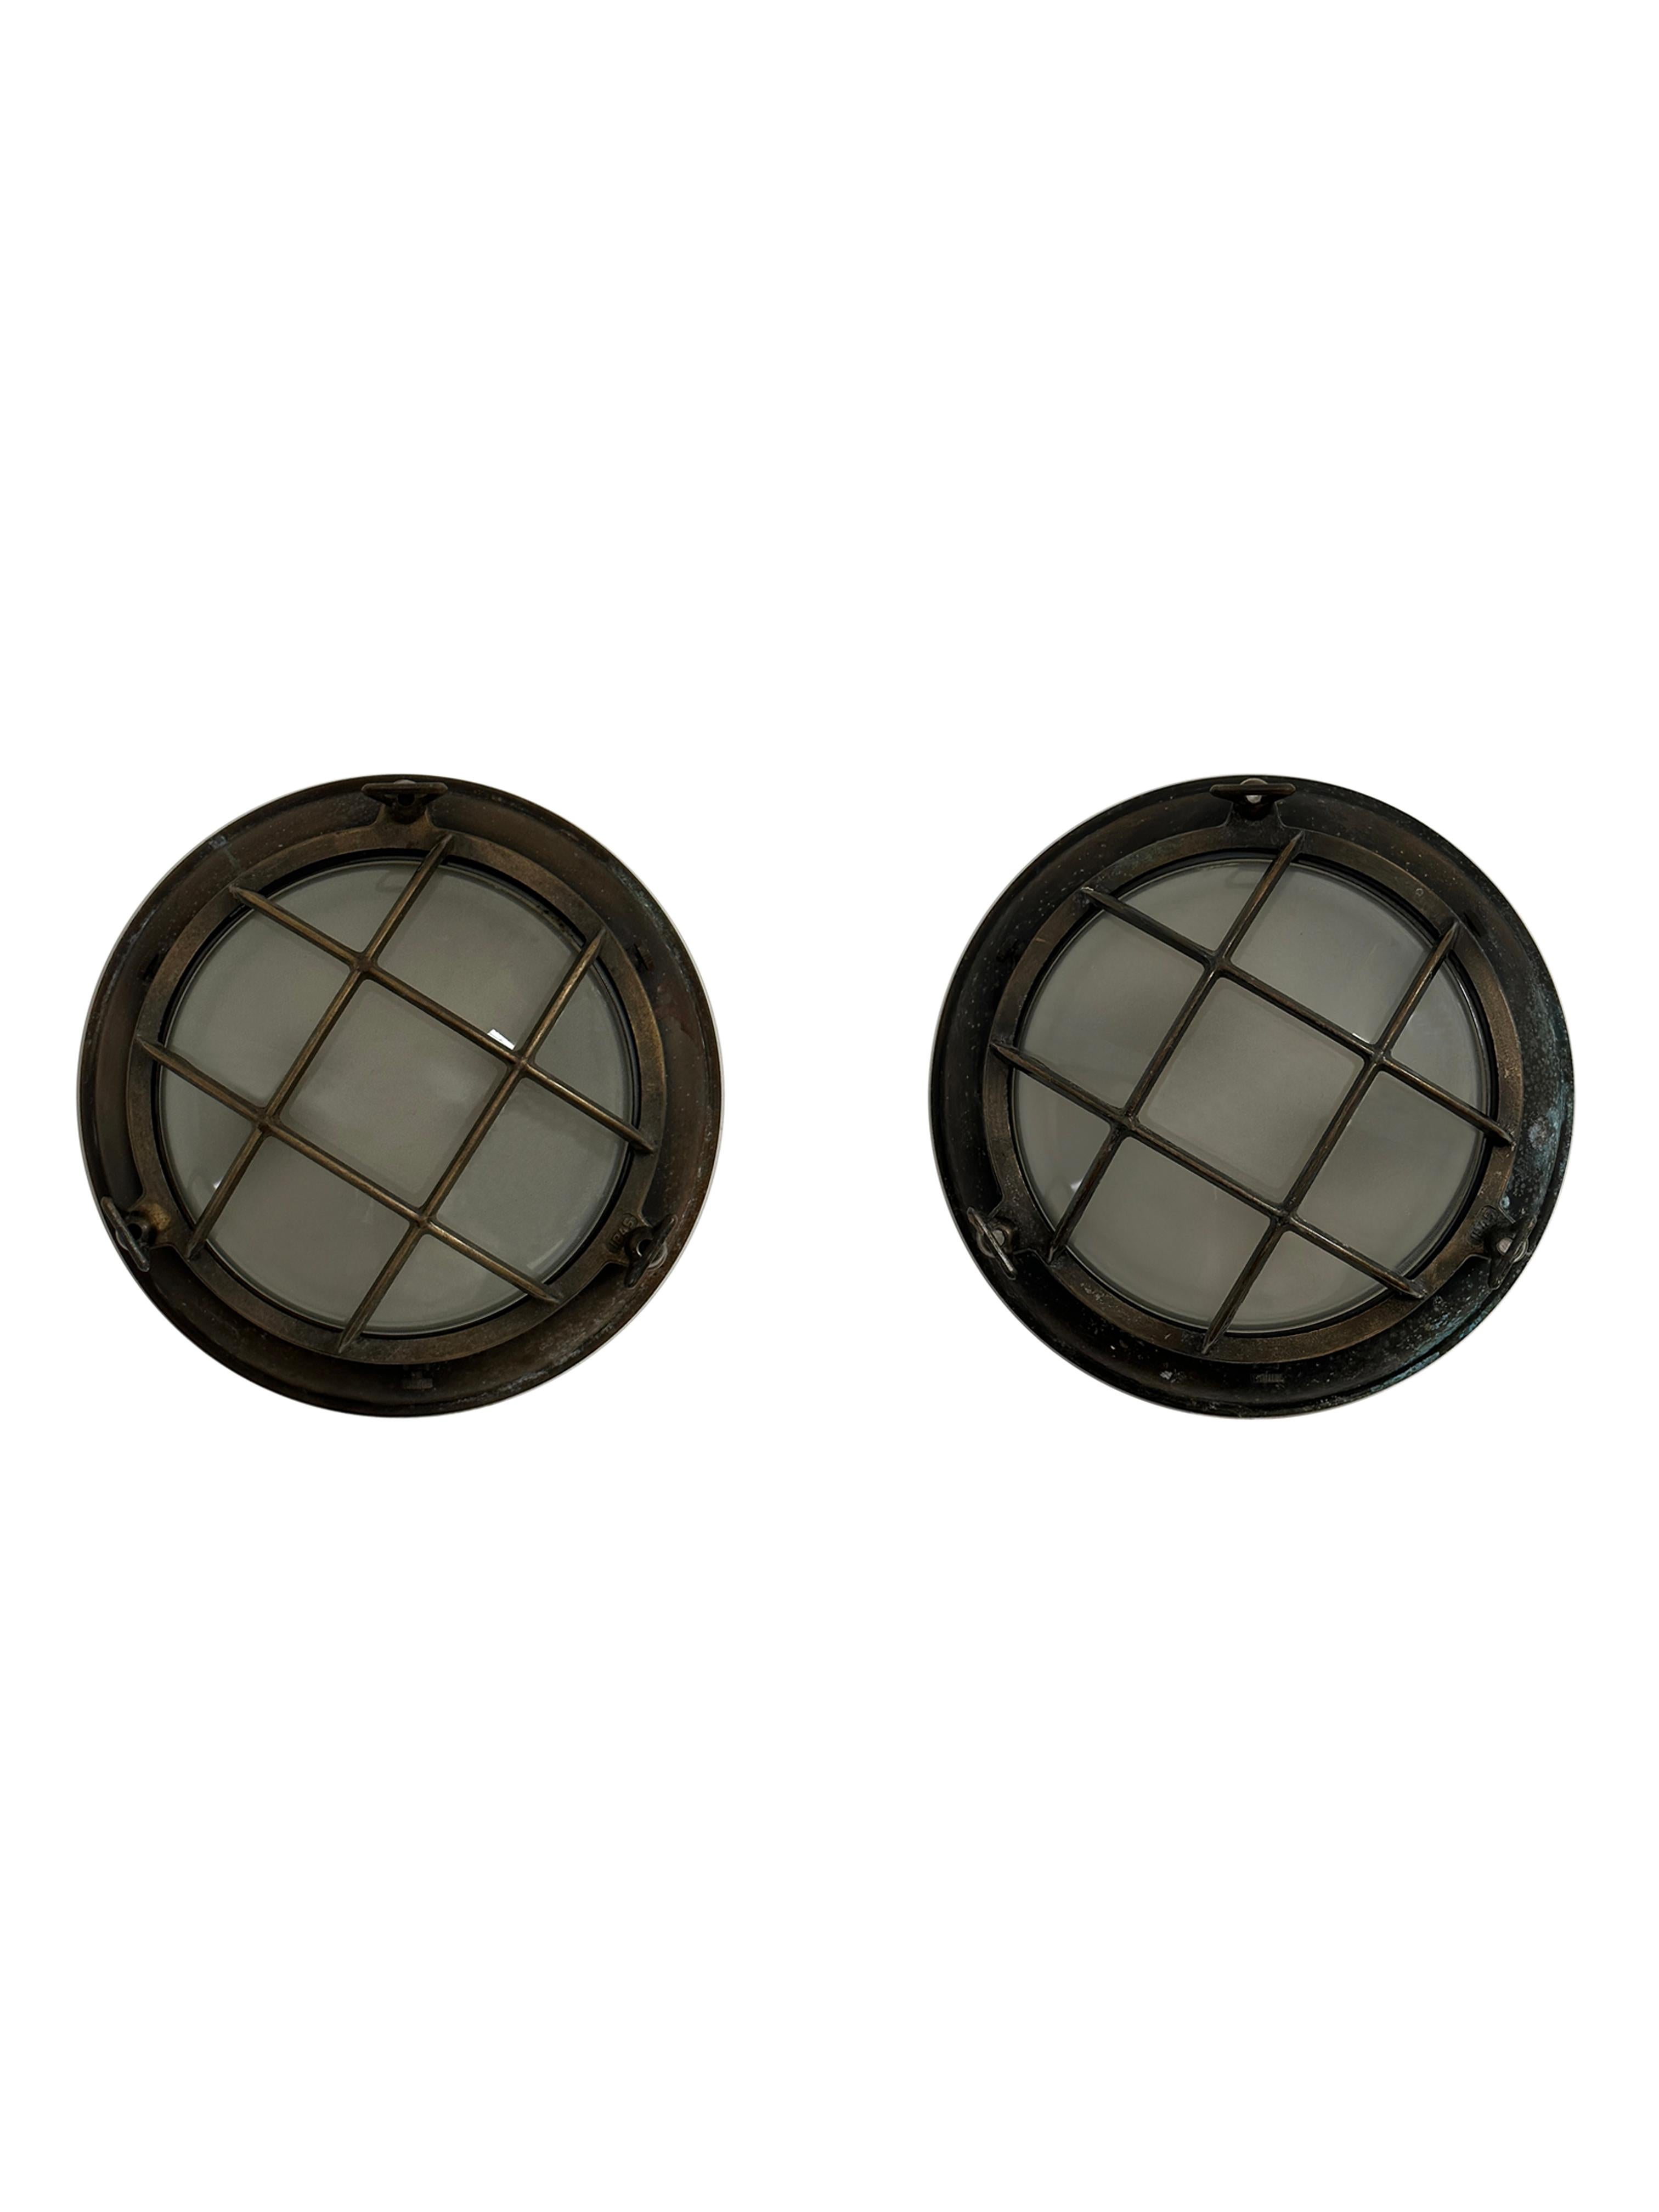 Pair Antique Vintage Industrial Brass Convex Glass Military Maritime Wall Light In Fair Condition For Sale In Sale, GB